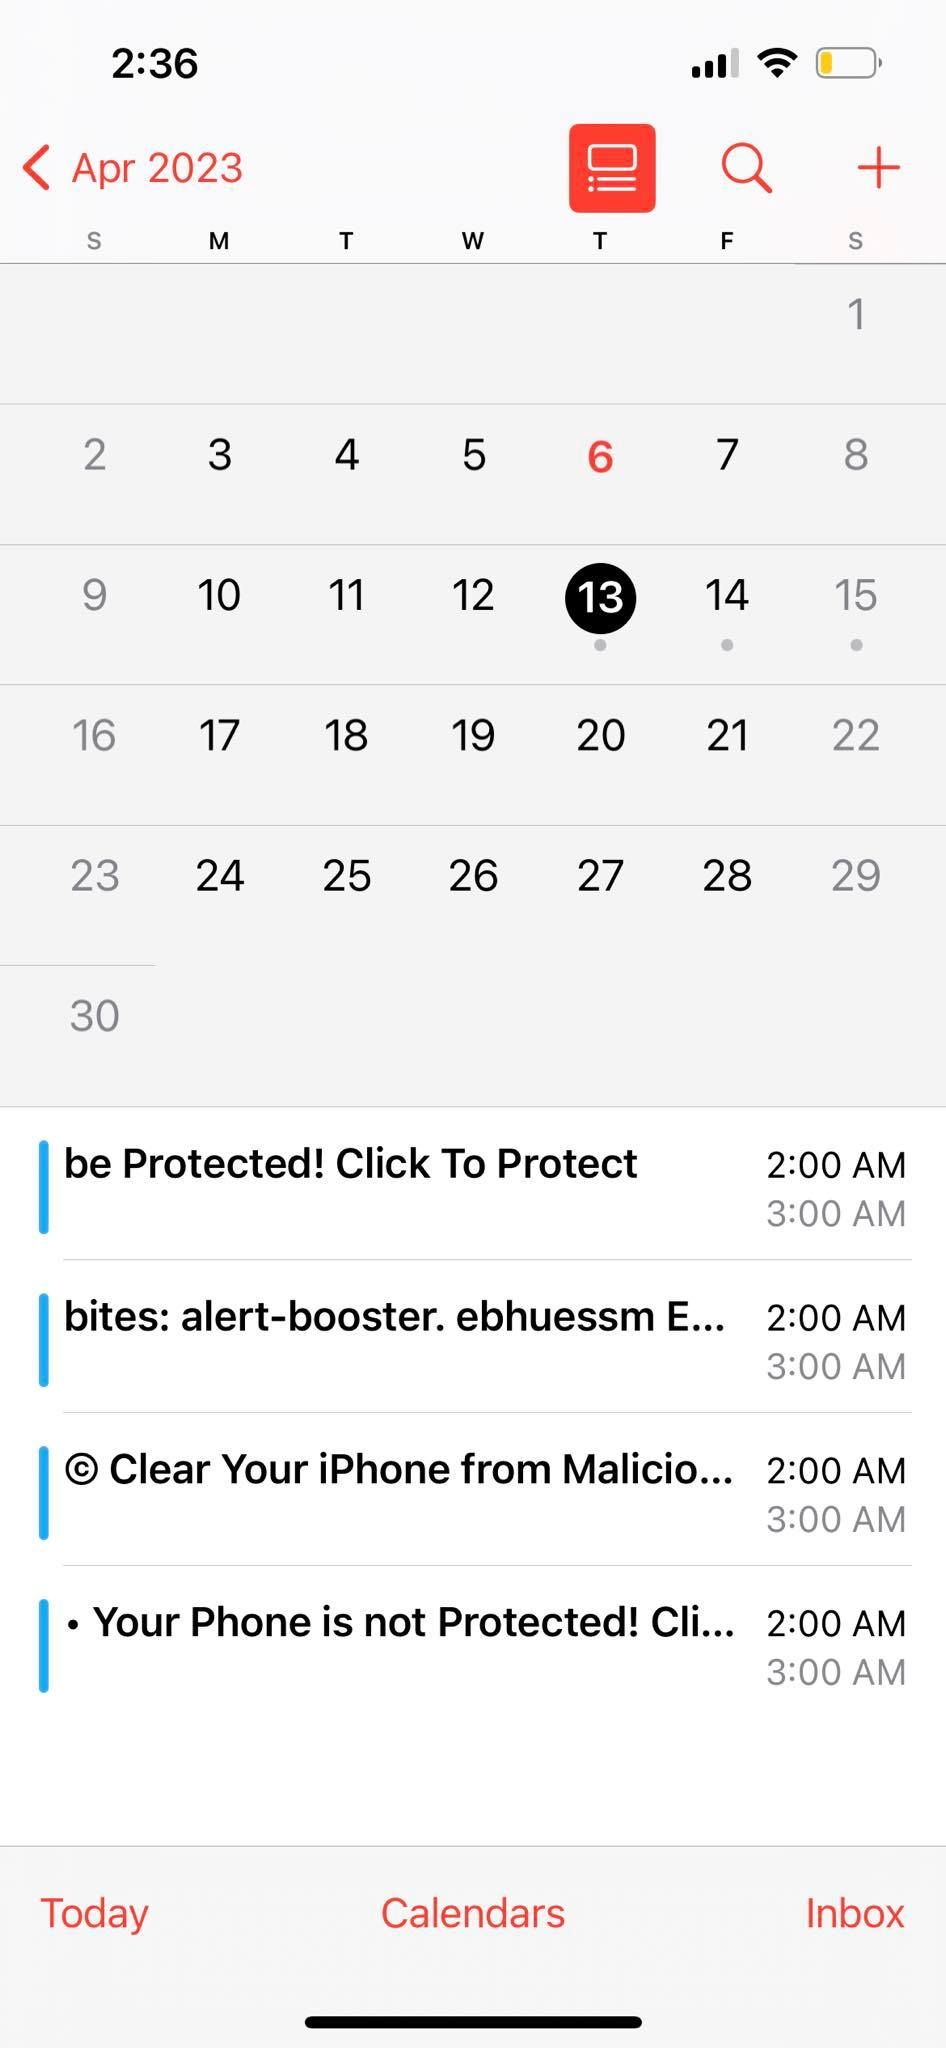 The Calendar App on iPhone Showing Events